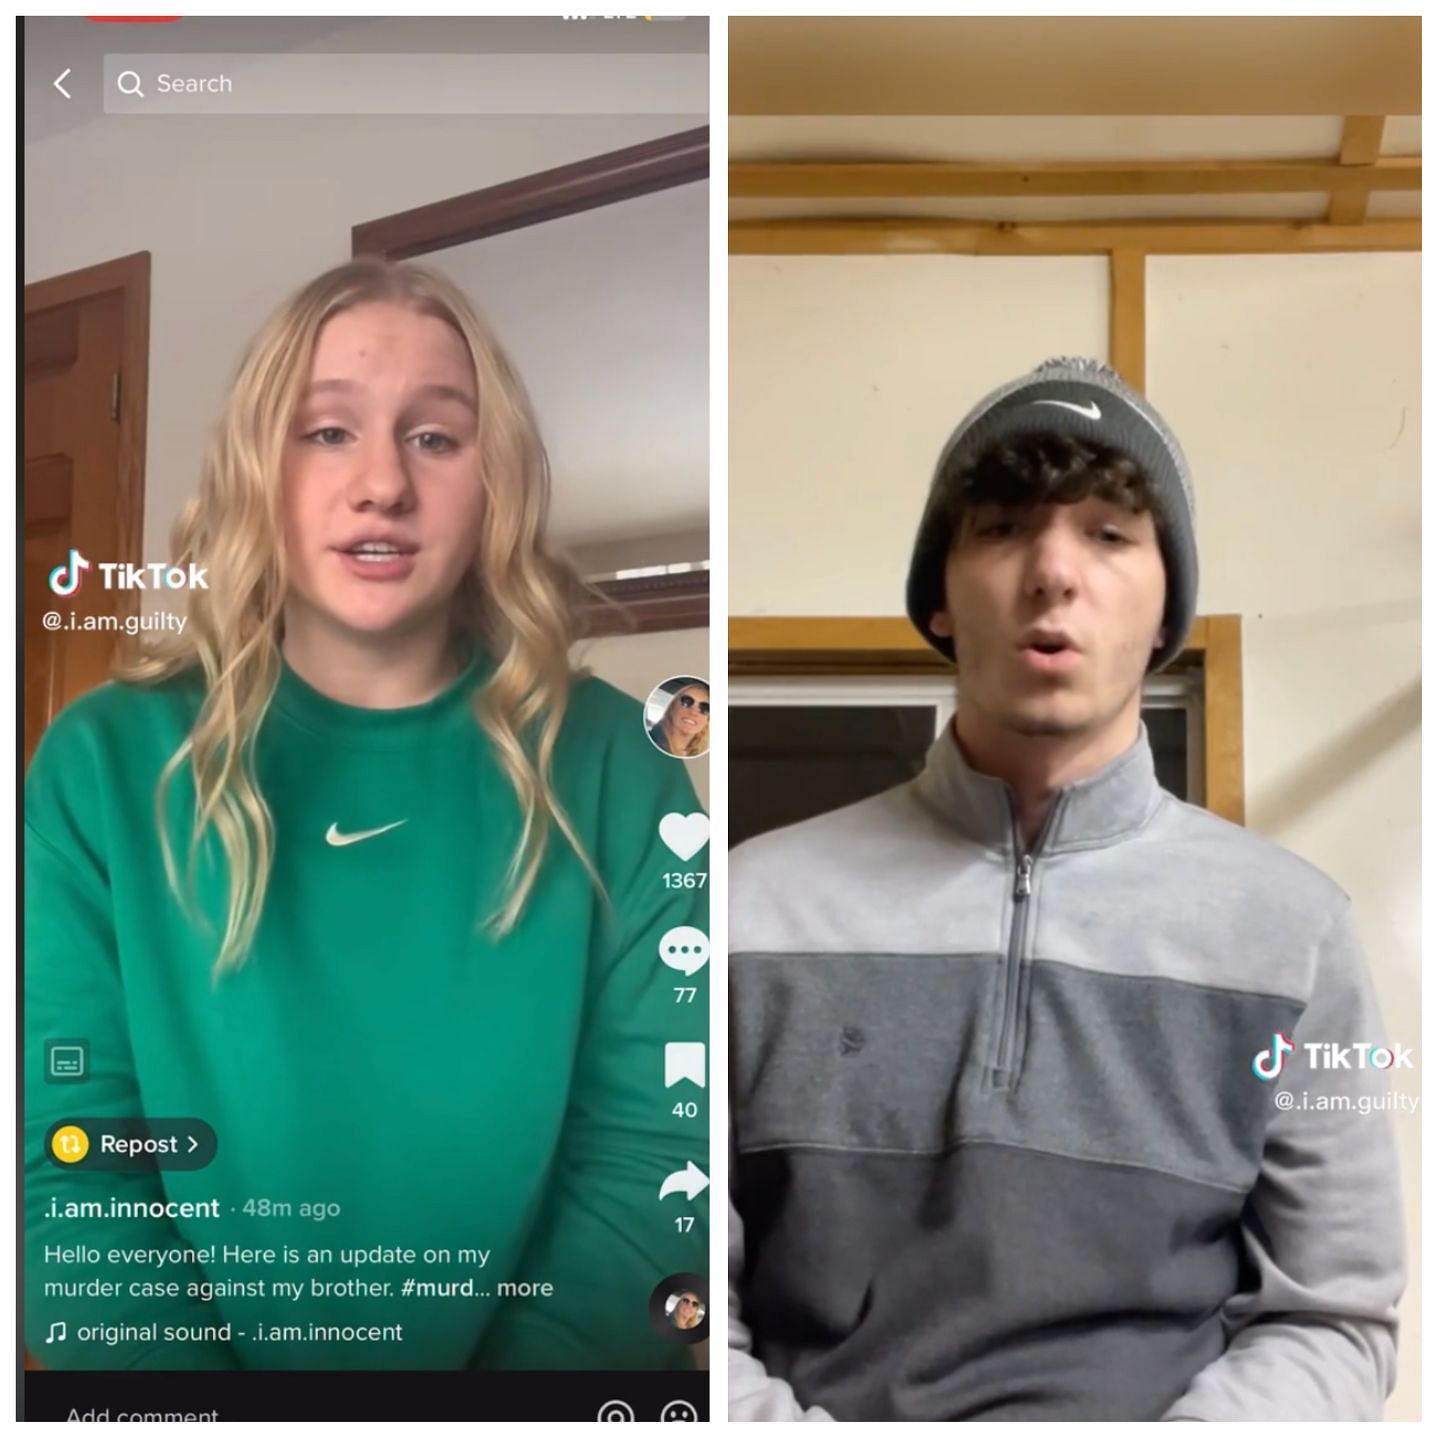 Both uploaded a series of videos claiming that they are not responsible for the death of the brother. (Image via TikTok)